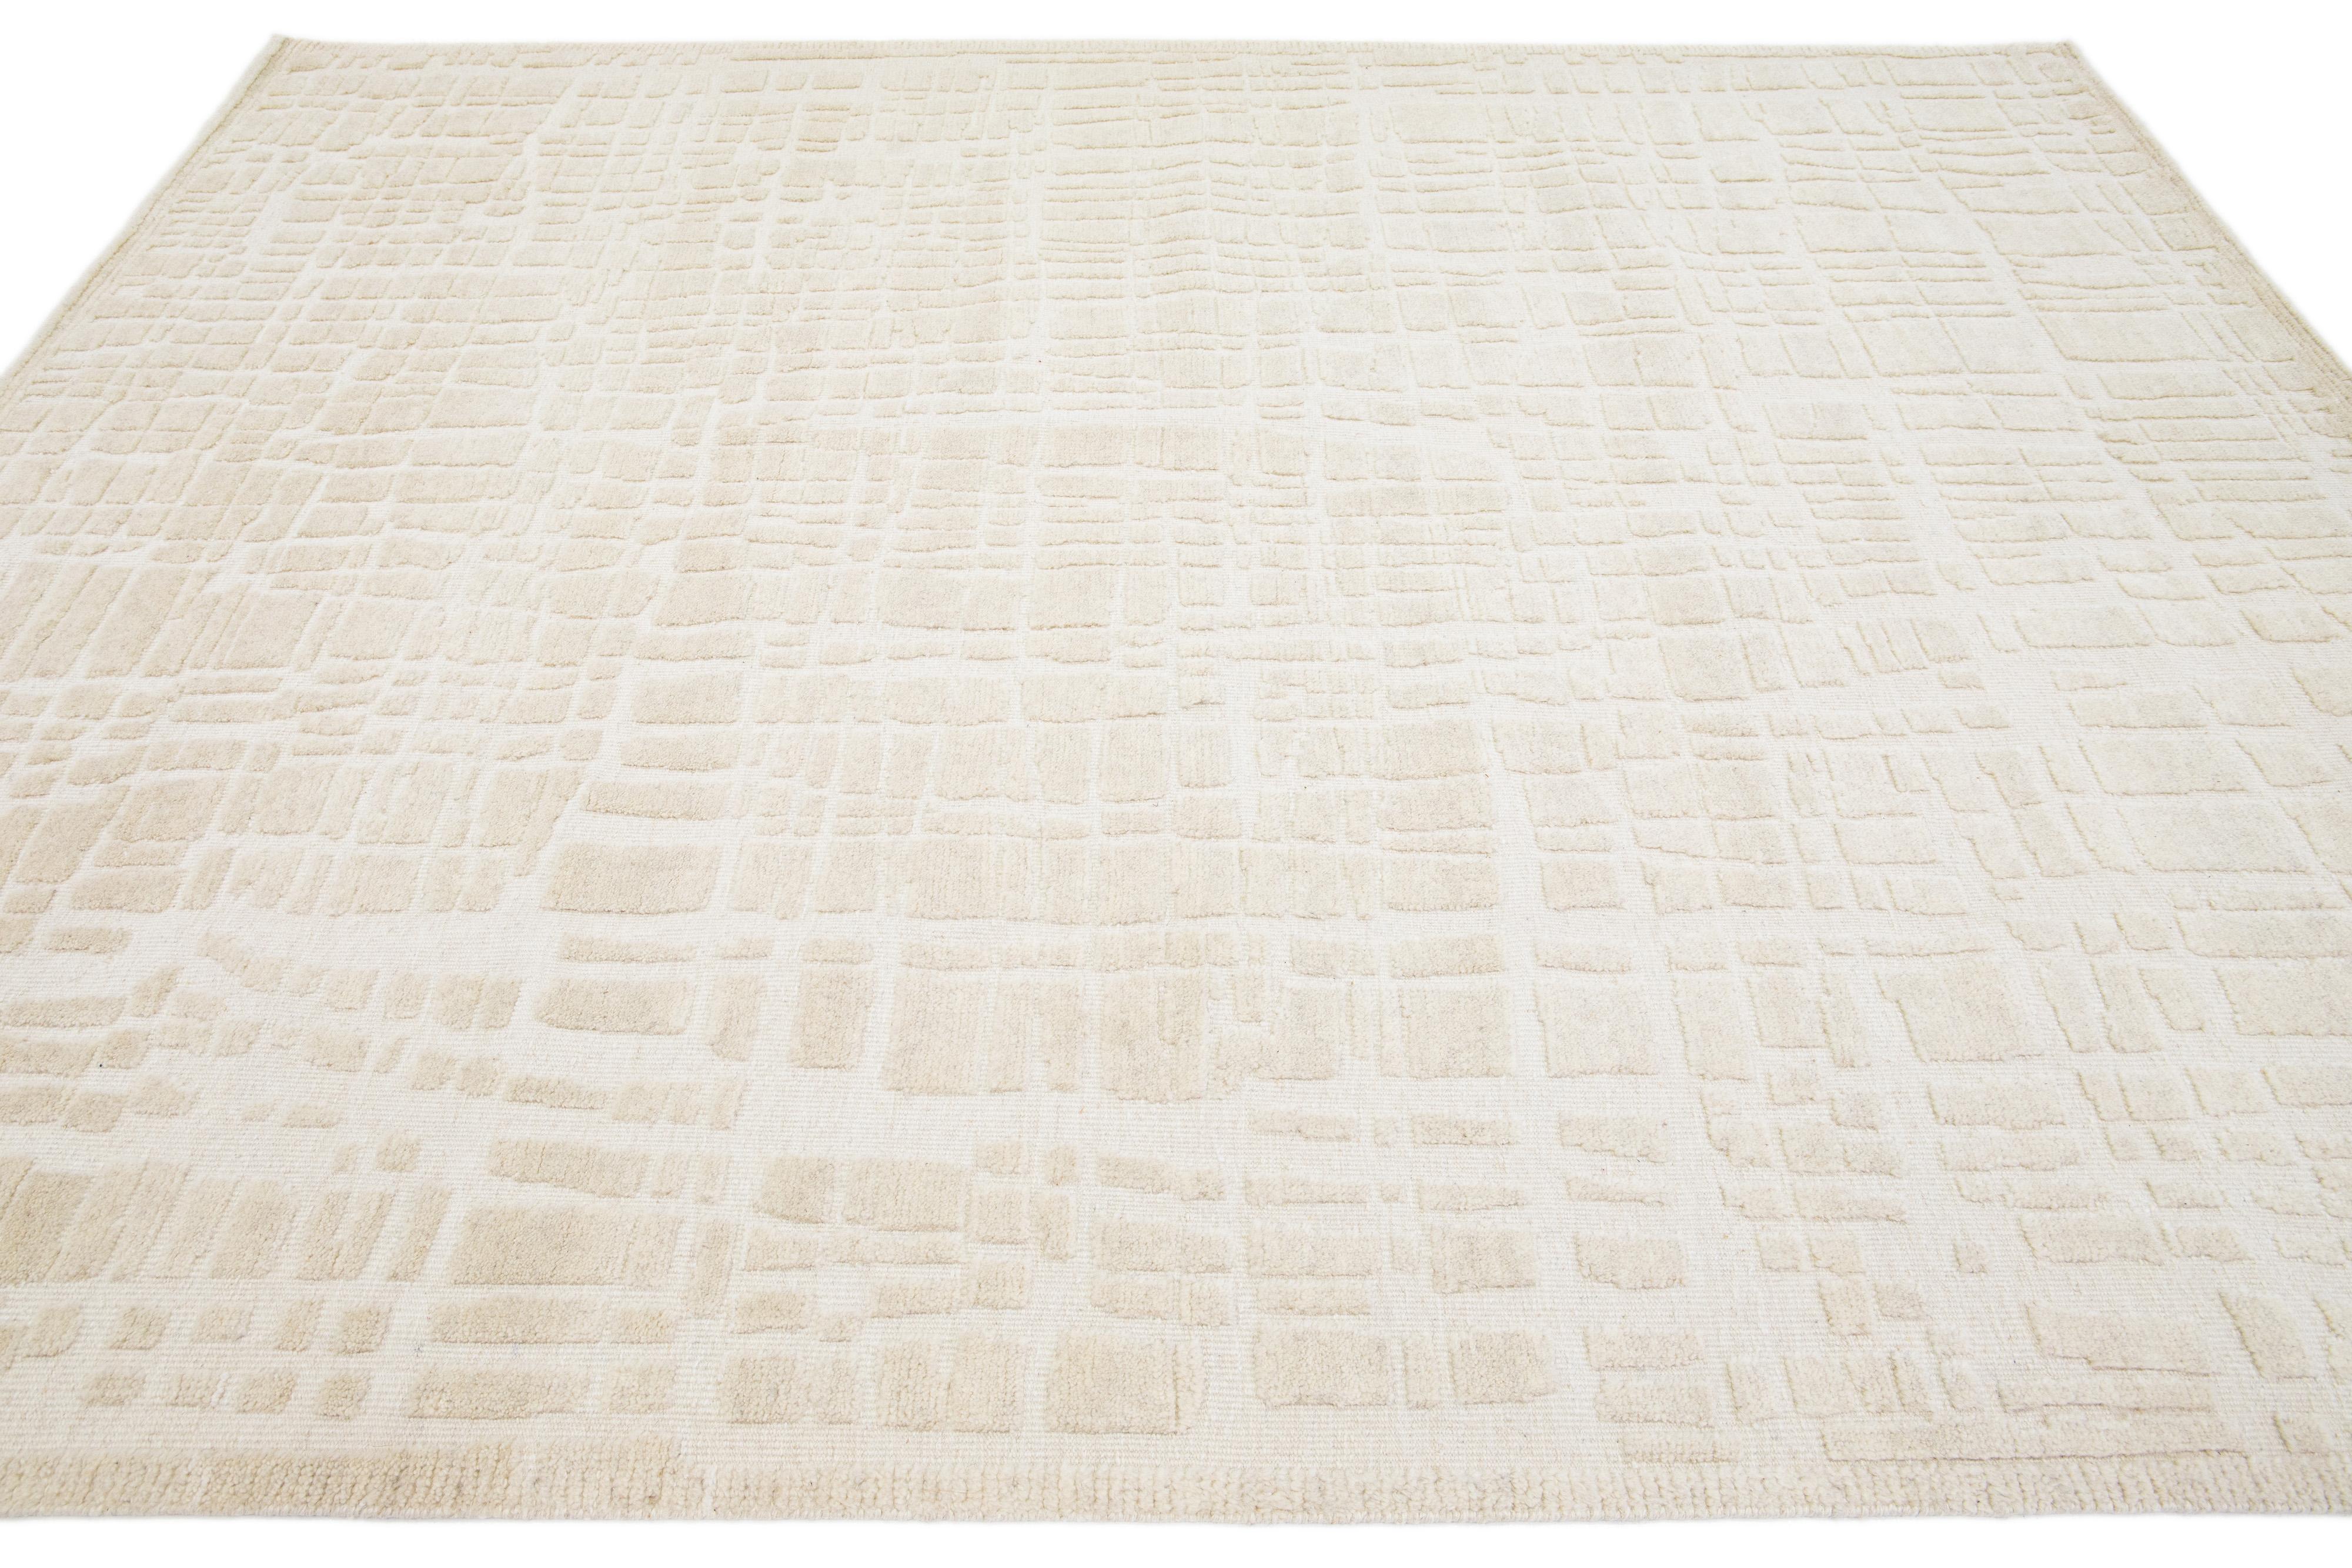 Pakistani Modern Abstrat Moroccan Style Wool Rug In Natural Beige  For Sale